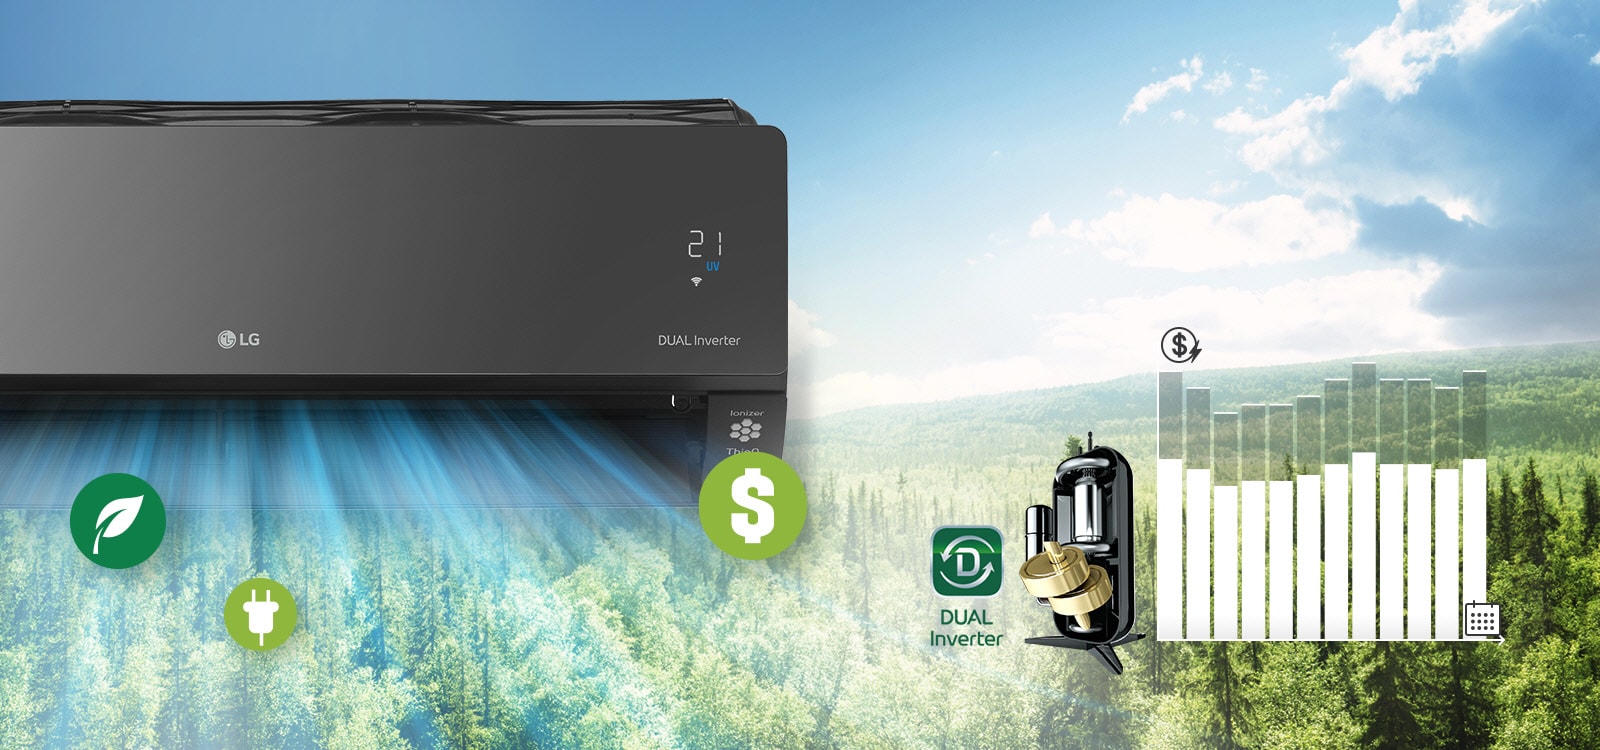 A forest landscape is in the background with half of the LG air conditioner visible on the side. The LG logo and Dual Inverter logo can be seen on the machine with the air quality panel lit up green. In front of the air conditioner in the air blowing out are three icons indicating clean air, money, and energy. To the right of the machine is the Dual Inverter logo and an image of the Dual Dual Inverter. Further to the right is a bar graph. The bars go up indicating more money spent and then go down to show that the dual inverter saves customers money.